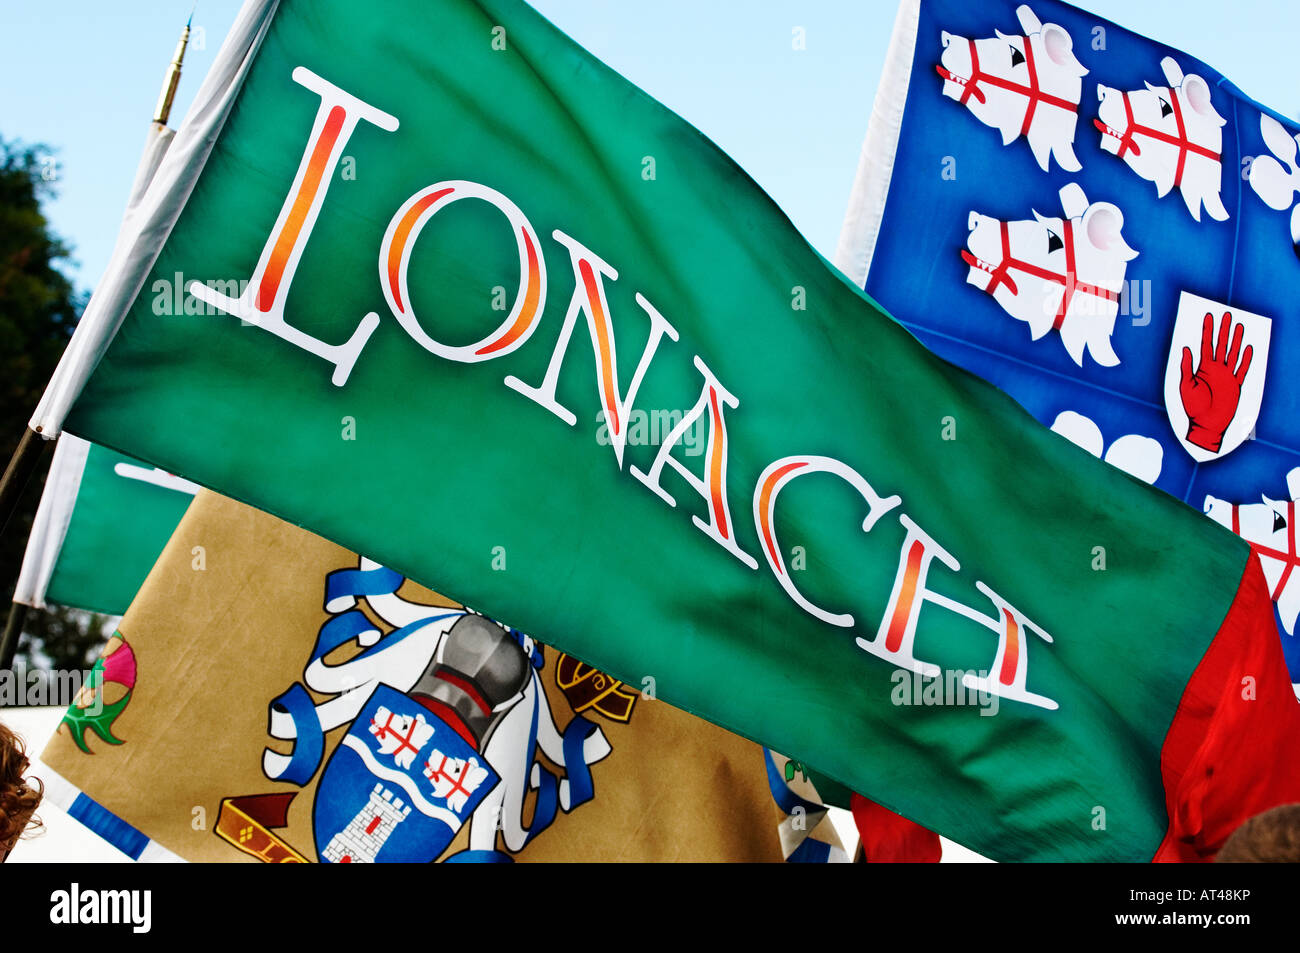 Flag and armorial banners of the Lonach Highlanders. Lonach Gathering and Highland Games at Strathdon, Grampian Region, Scotland Stock Photo